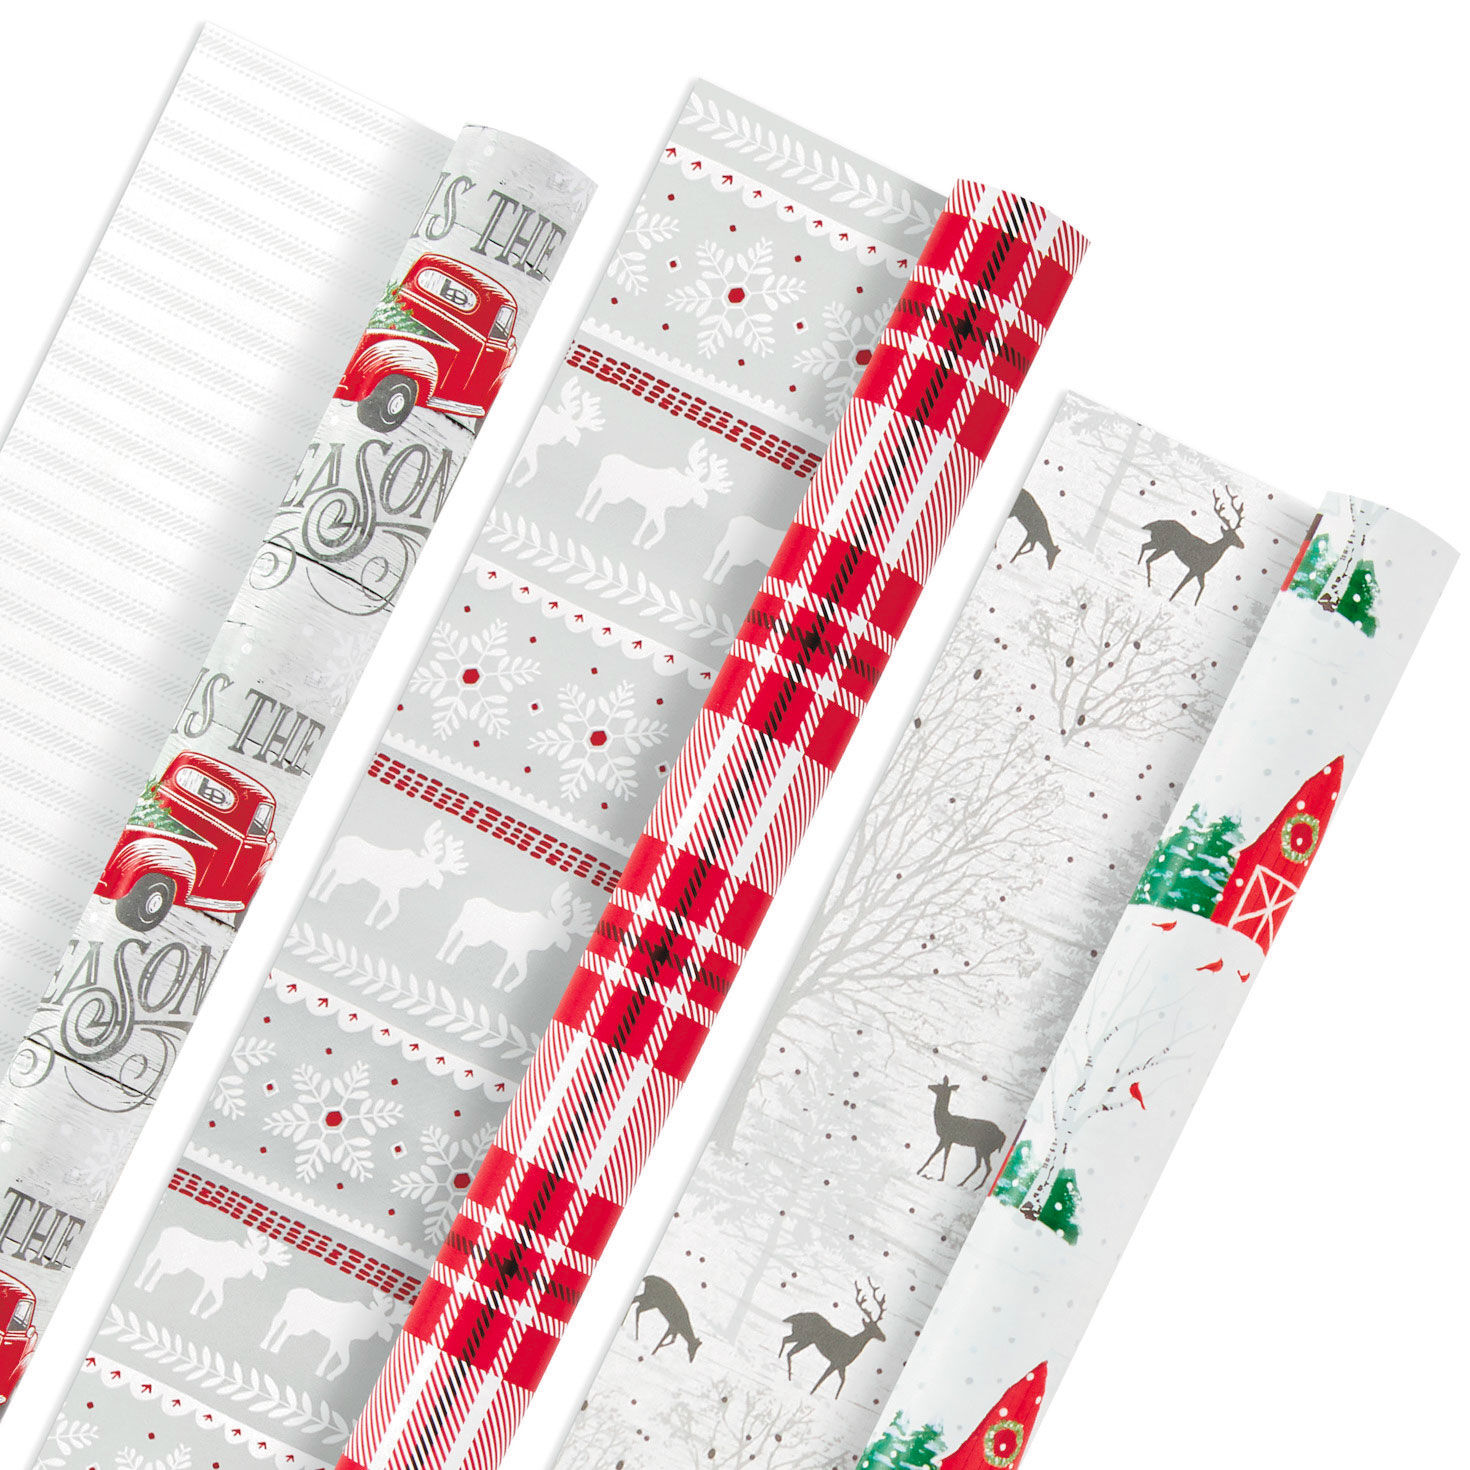 American Greetings Christmas Reversible Wrapping Paper, Red, Green,  Christmas Icons (4-Rolls, 120 Total Sq. ft.) 